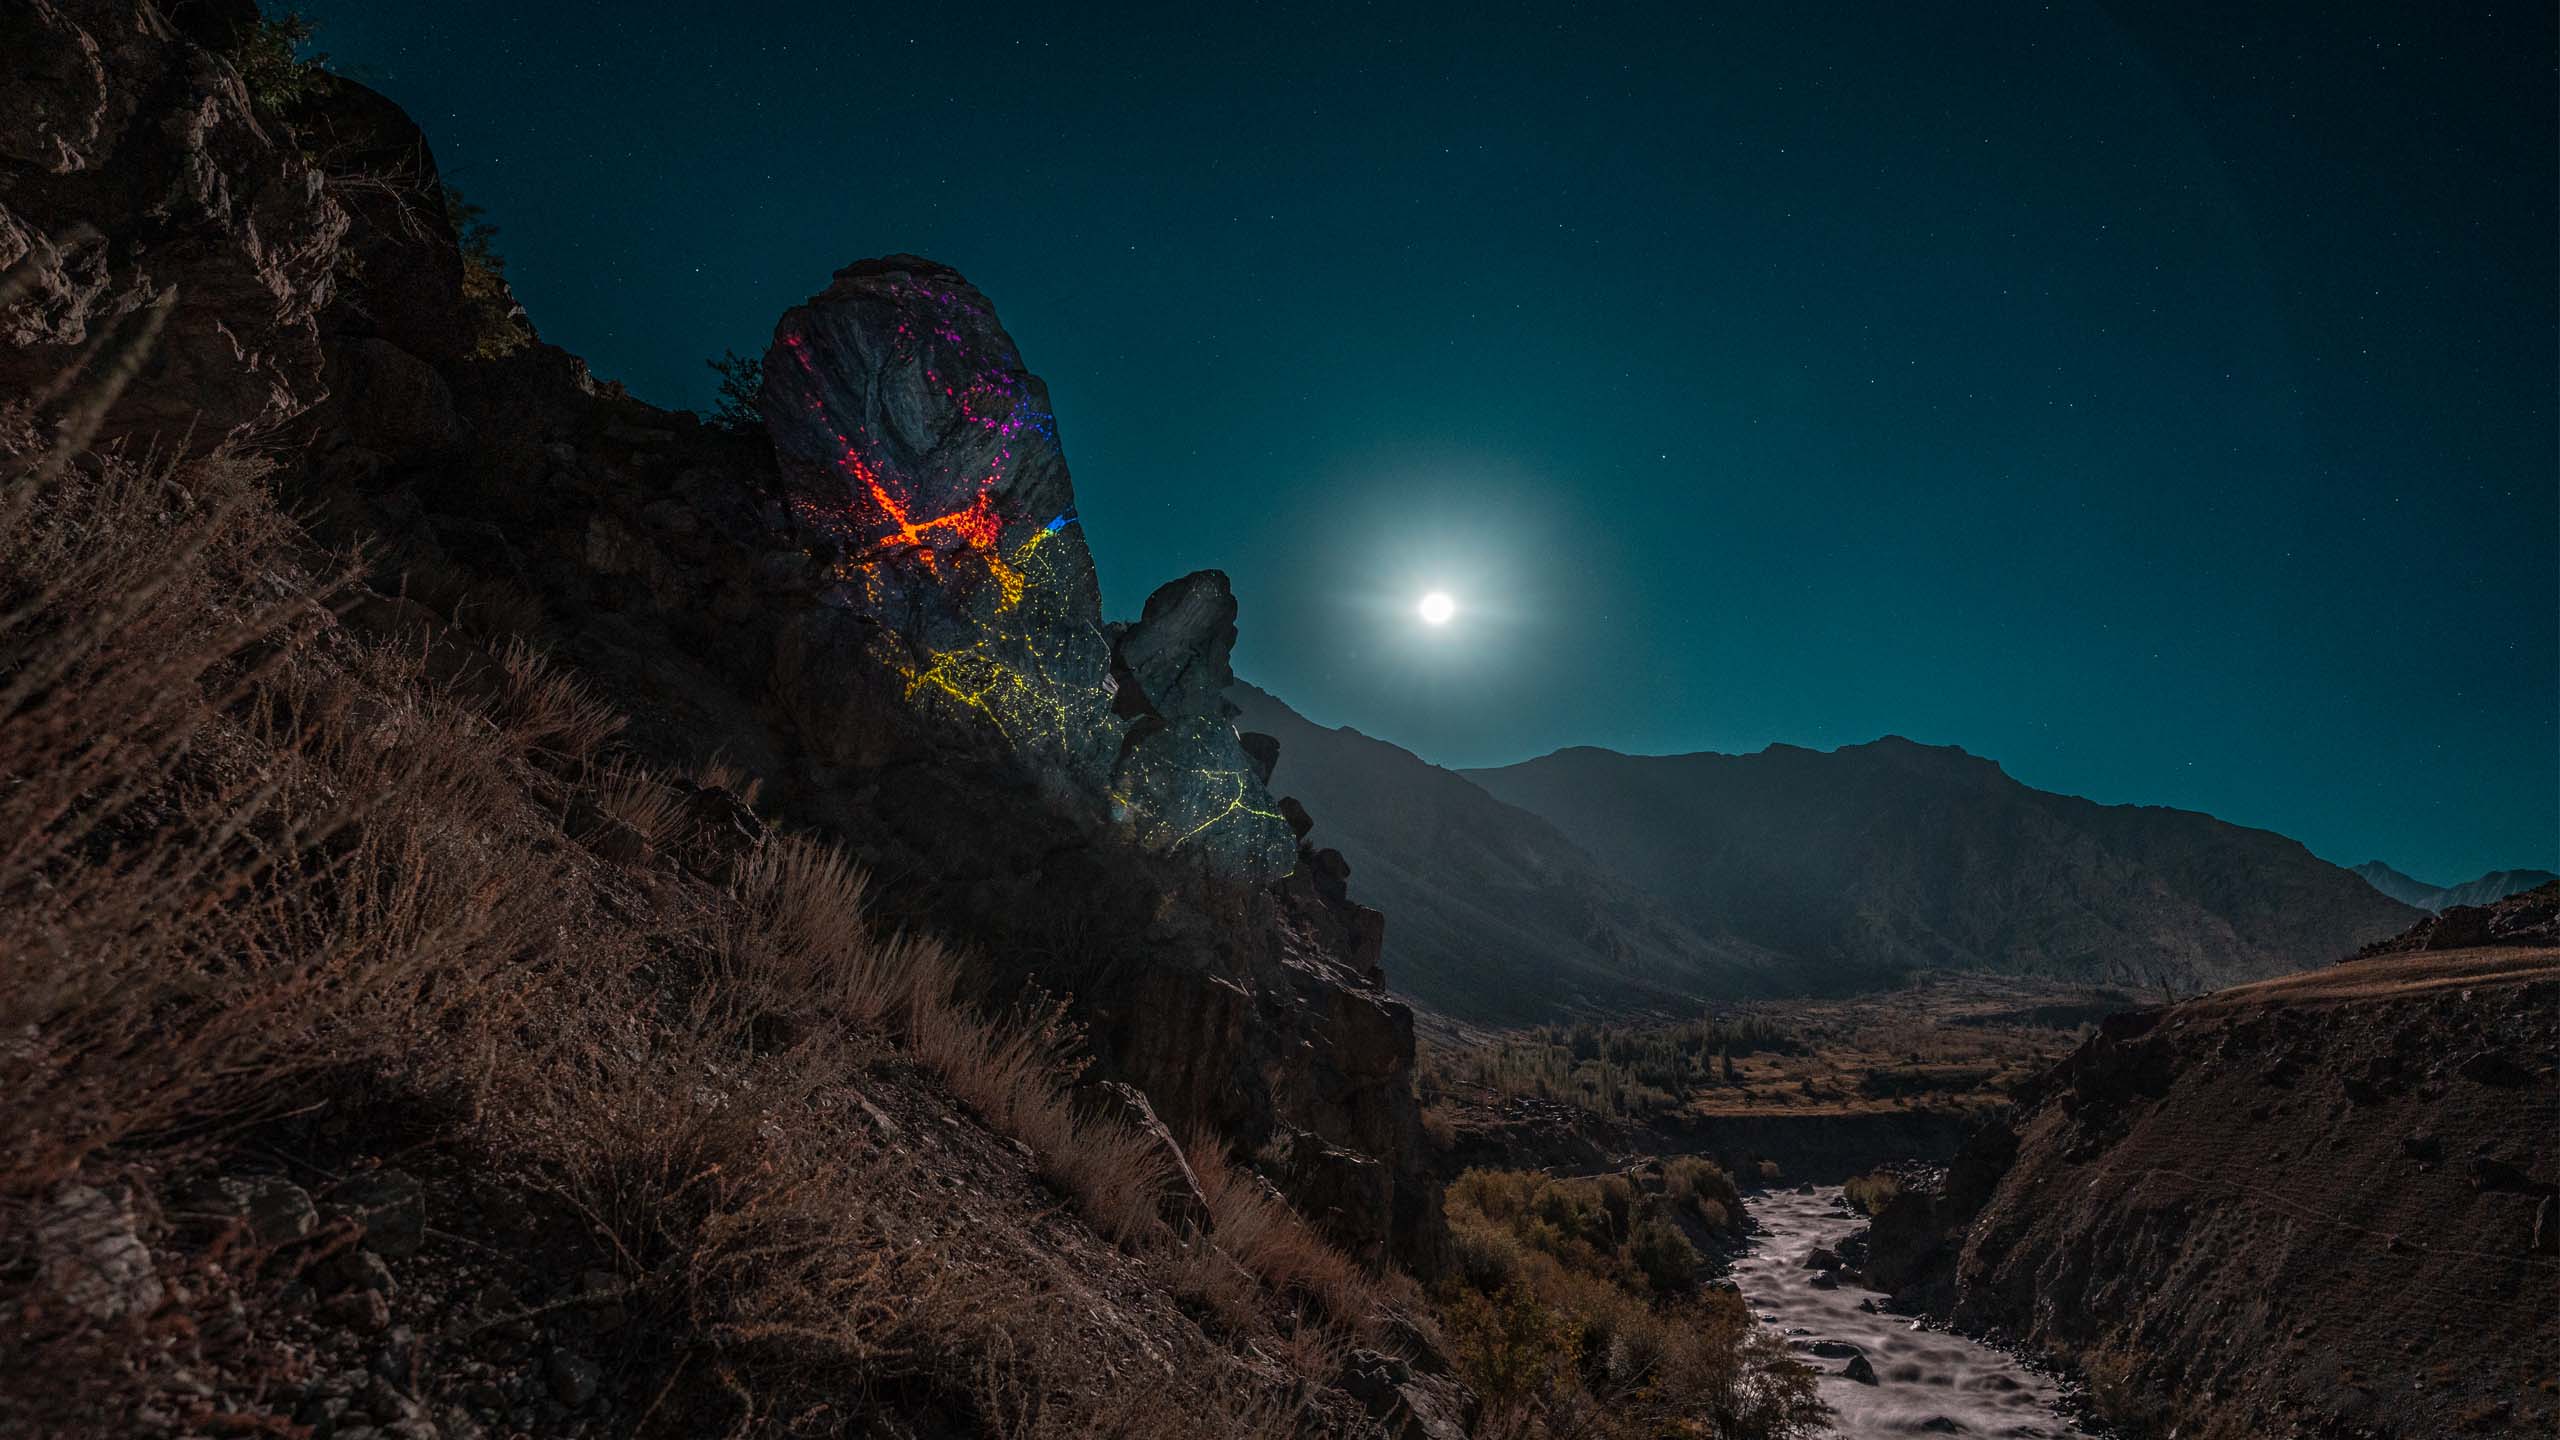 Colorful land-art installation at night on a boulder with stars in the sky and a river and mountains in the baclground. Ladakh, Himalaya